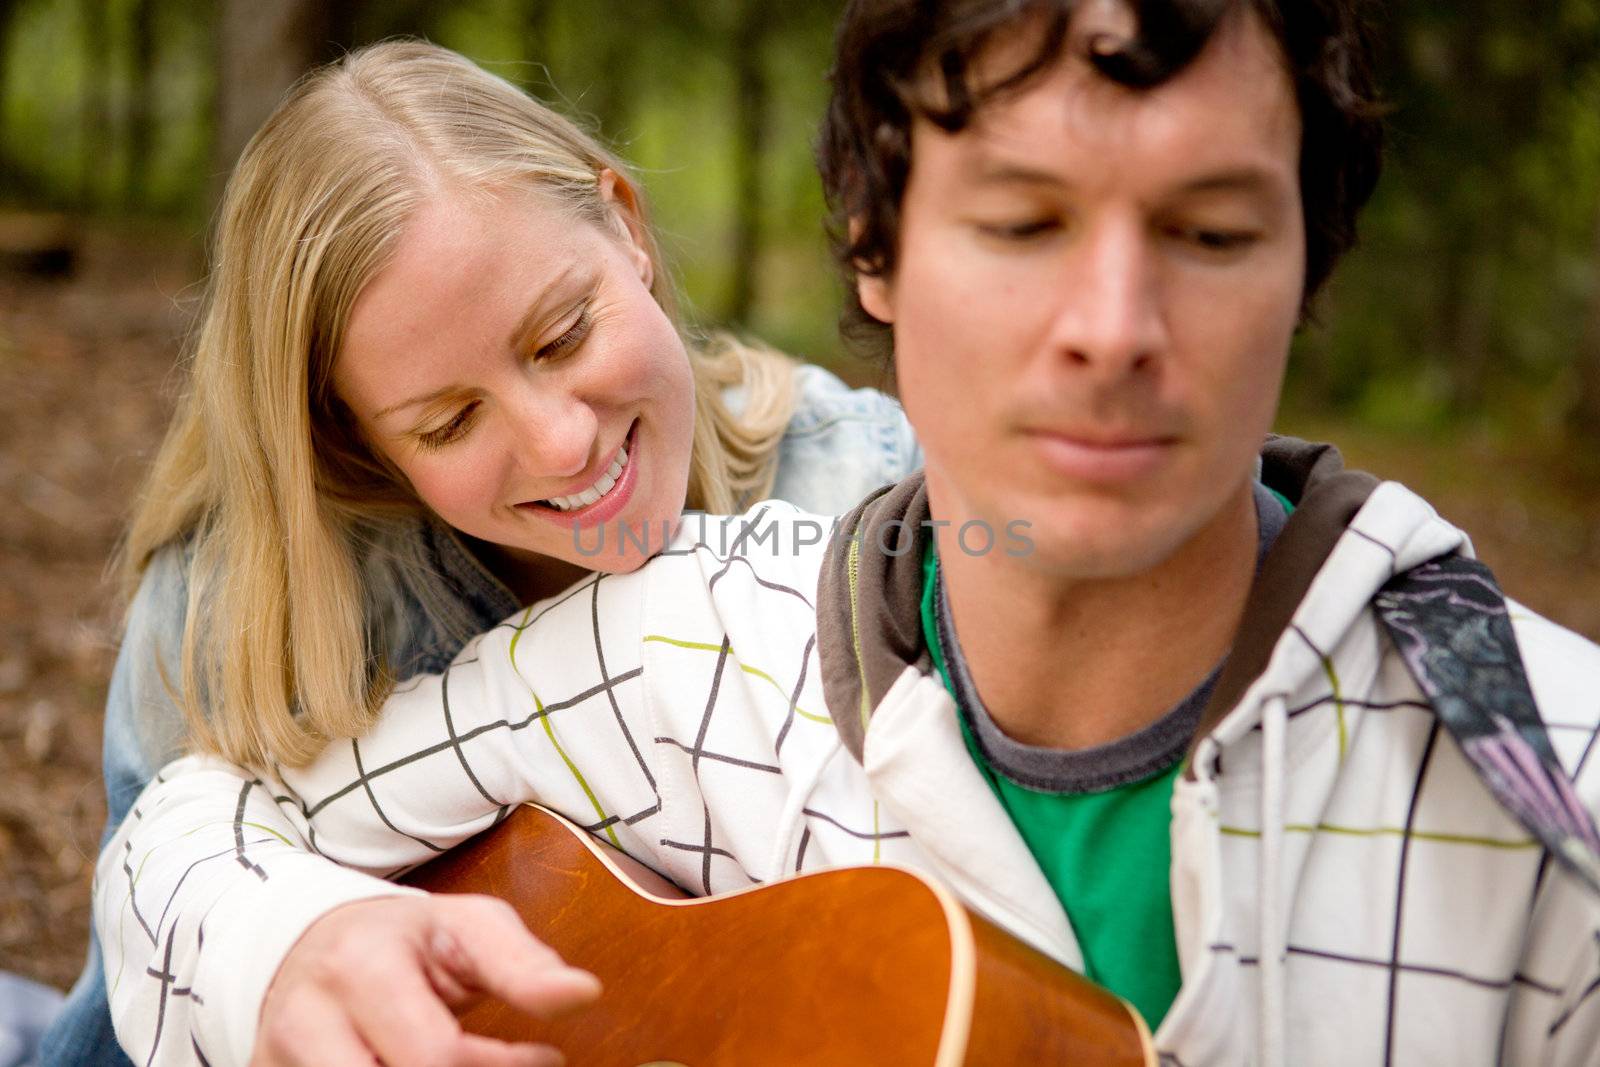 A couple enjoying themselves outdoors with a guitar, focus on woman